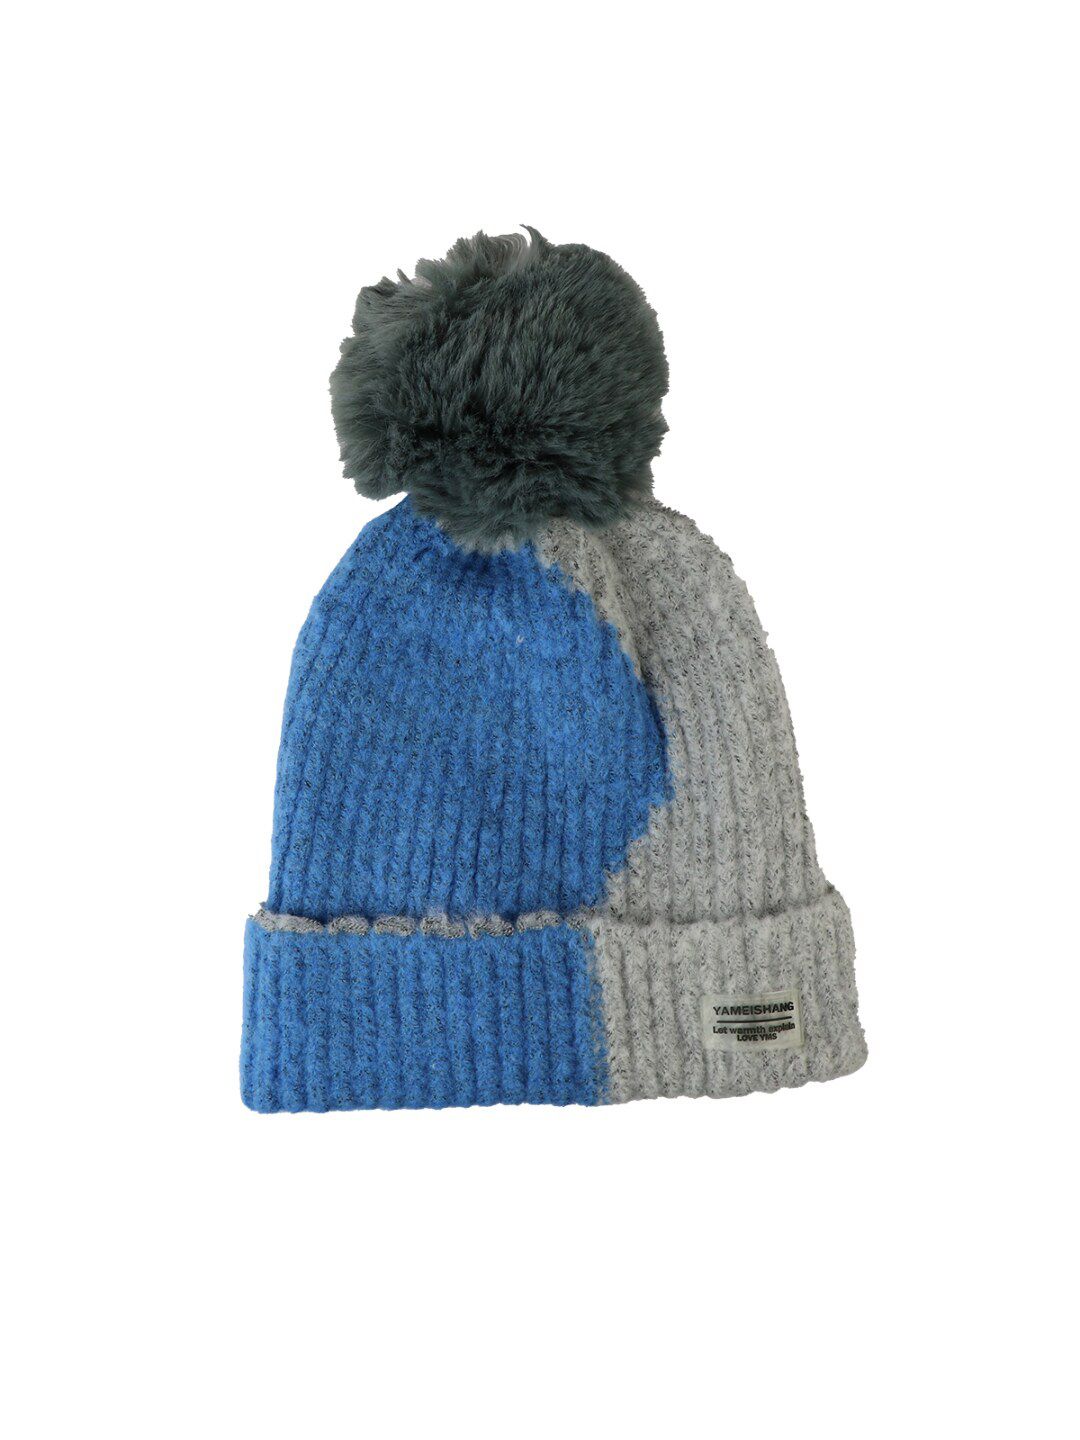 iSWEVEN Unisex Grey & Blue Colourblocked Beanie Price in India